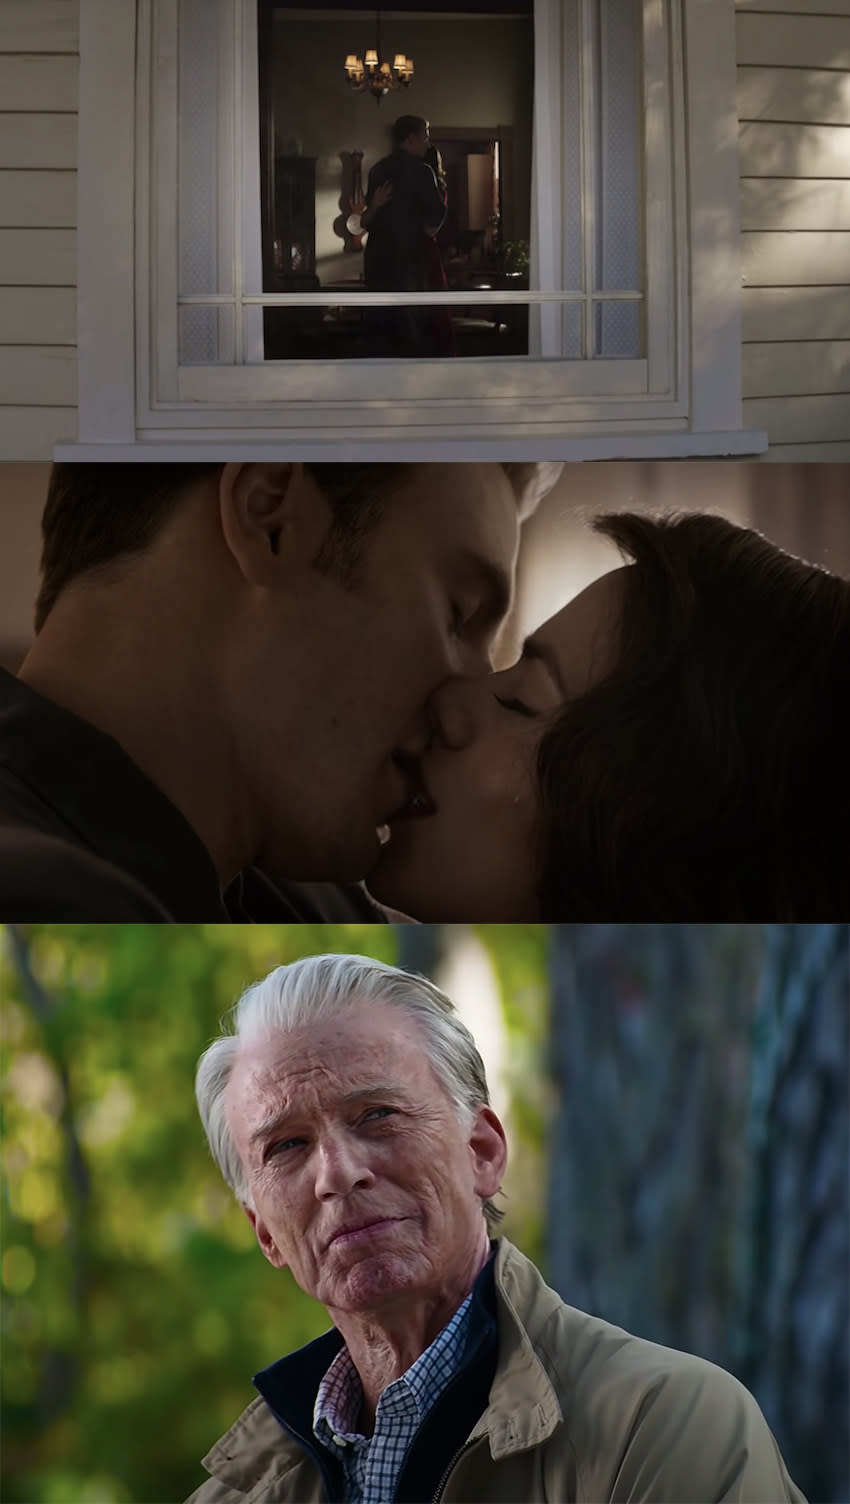 Steve Rogers and Peggy dancing in their home and kiss. Then back in present-day when Steve Rogers is an old man.